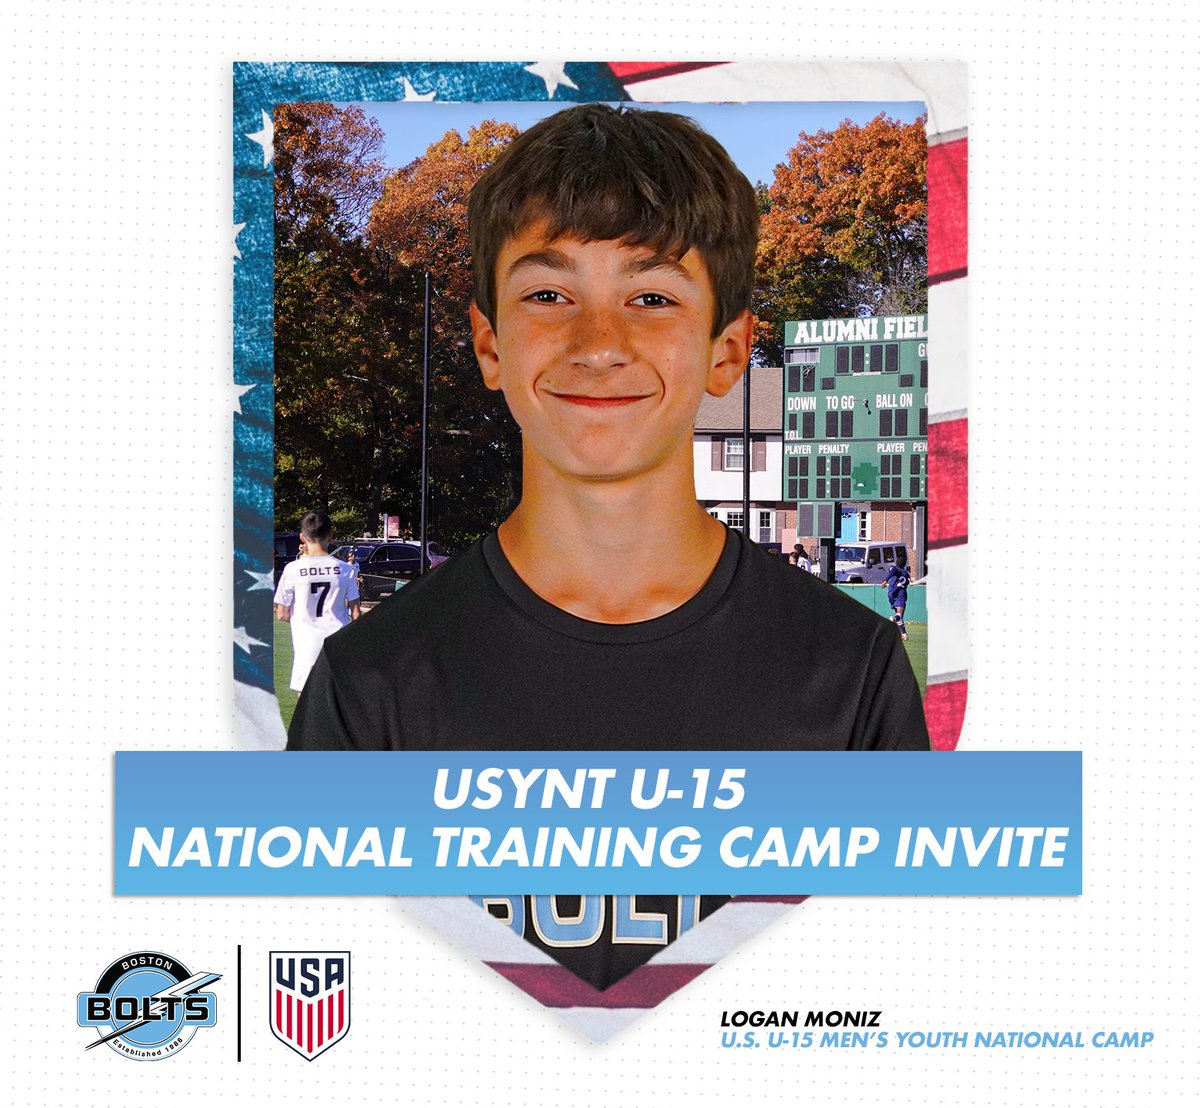 U.S Youth National Team bound 🇺🇸🇺🇸🇺🇸 🚨 Logan Moniz earns his first call up to the @USYNT Read more about Logan’s selection to the upcoming USYNT U-15 national training camp in Chula Vista, CA, link in bio 🔗